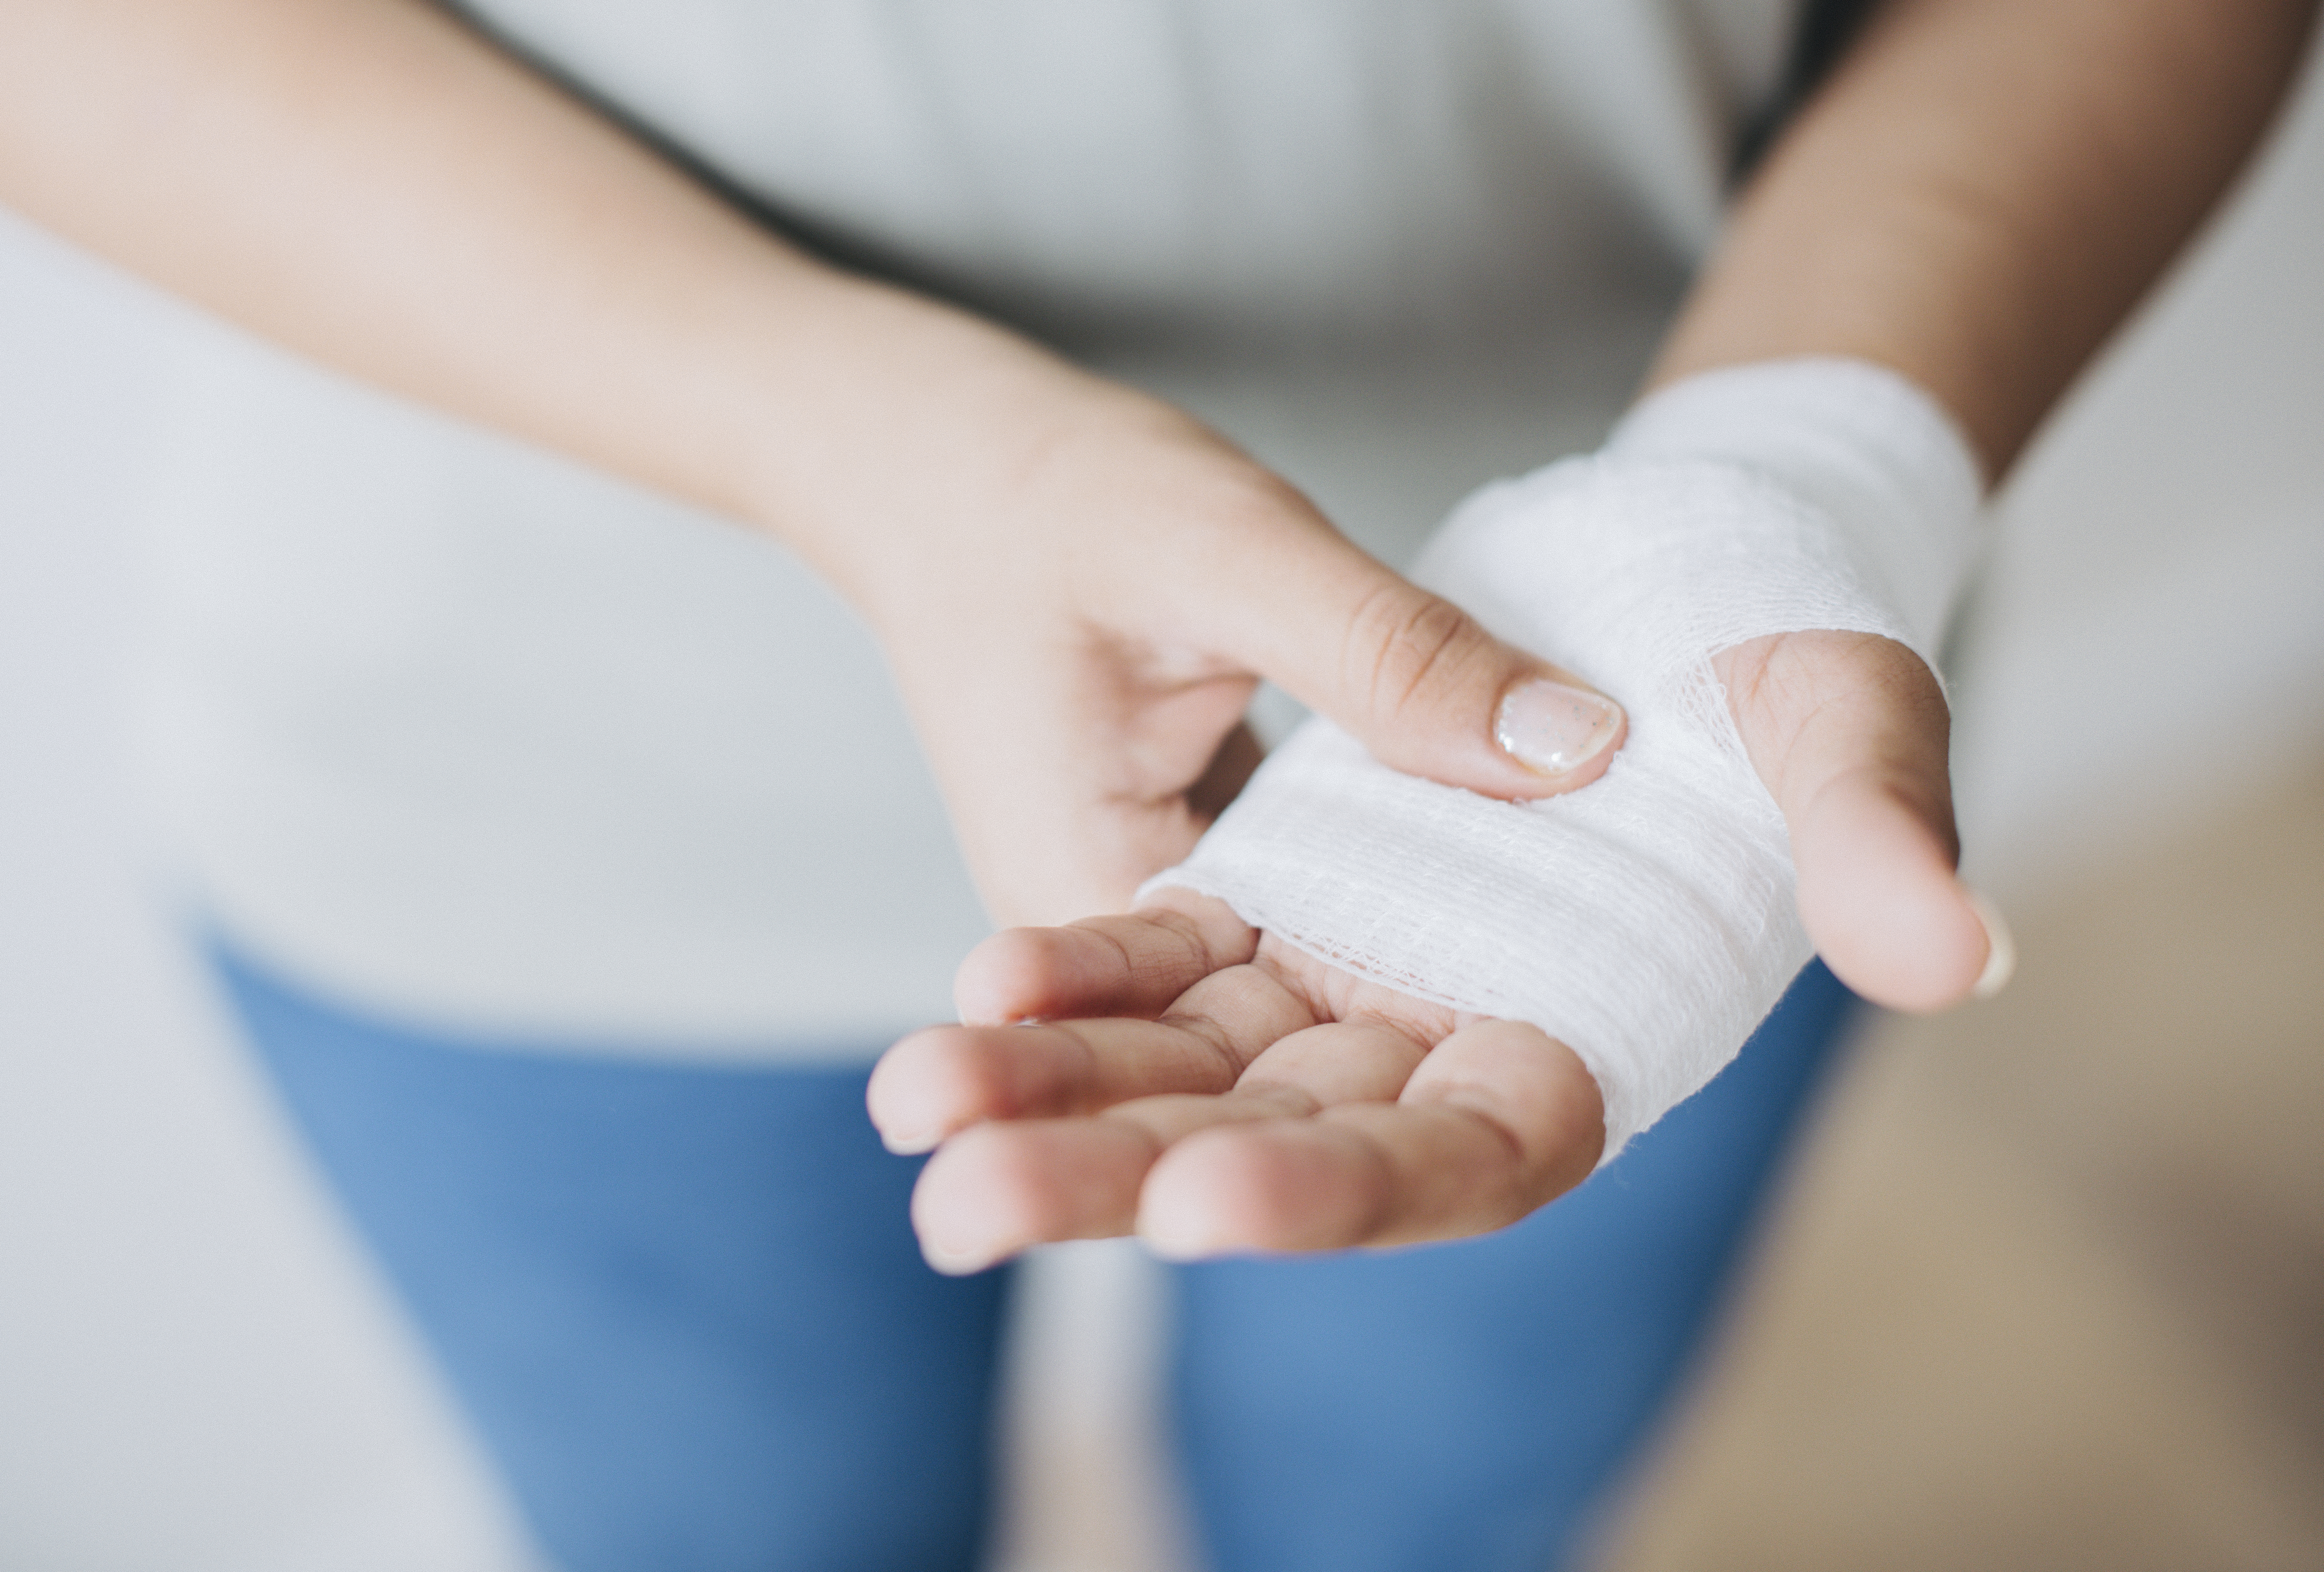 After a serious car accident, dealing with insurance companies can be a hassle that injured people do not need.